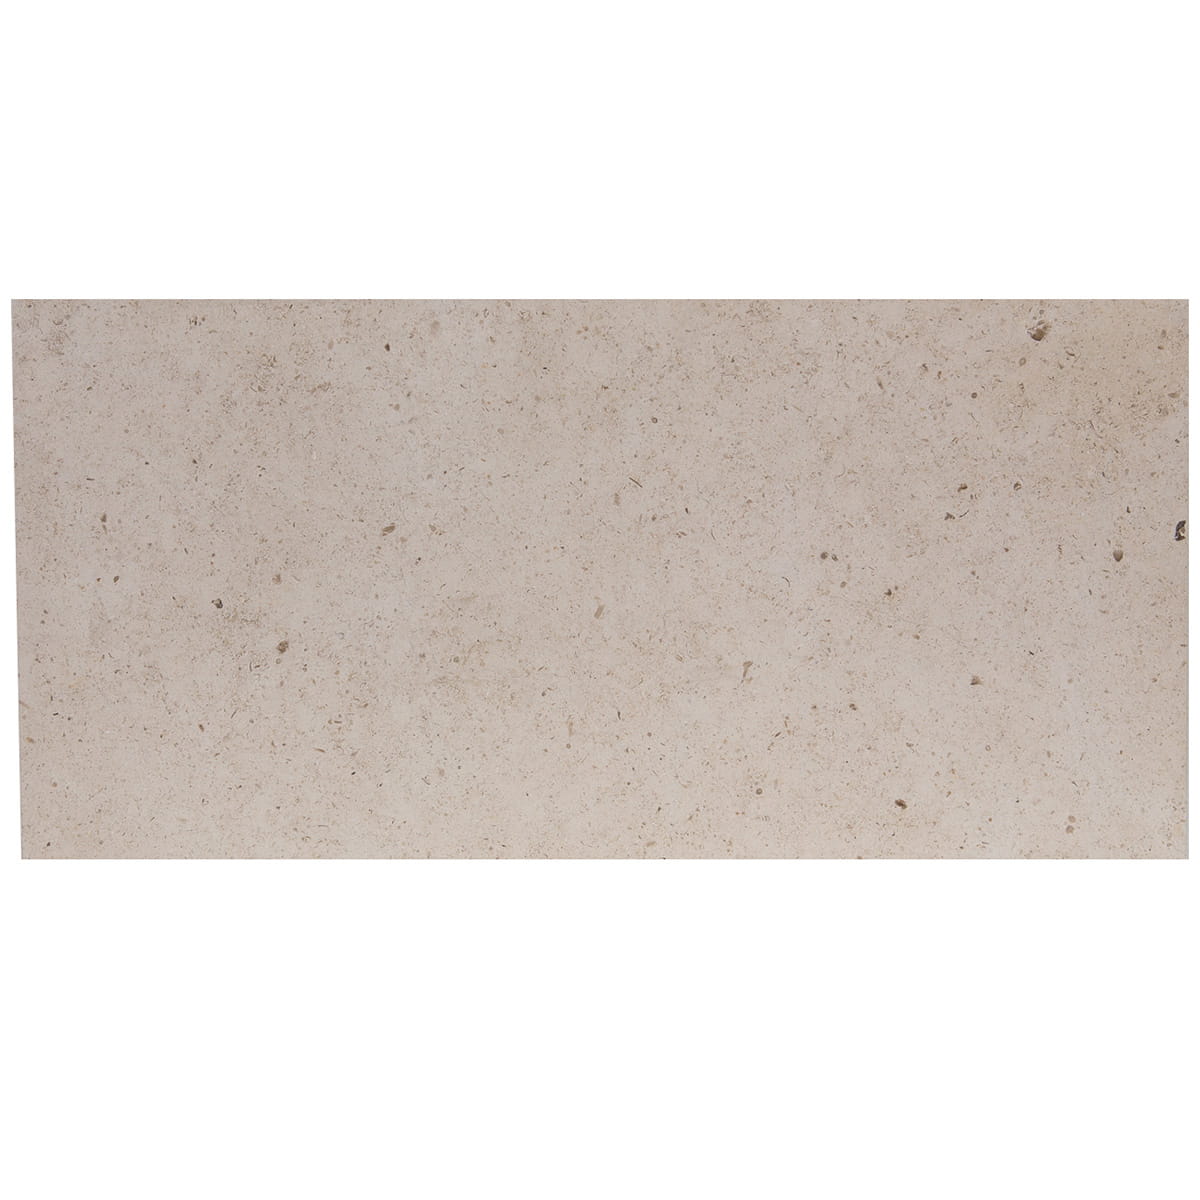 Belair Collection Honed Limestone Field Tiles Straight Edge 12x24x3/8 Classic Timeless Look